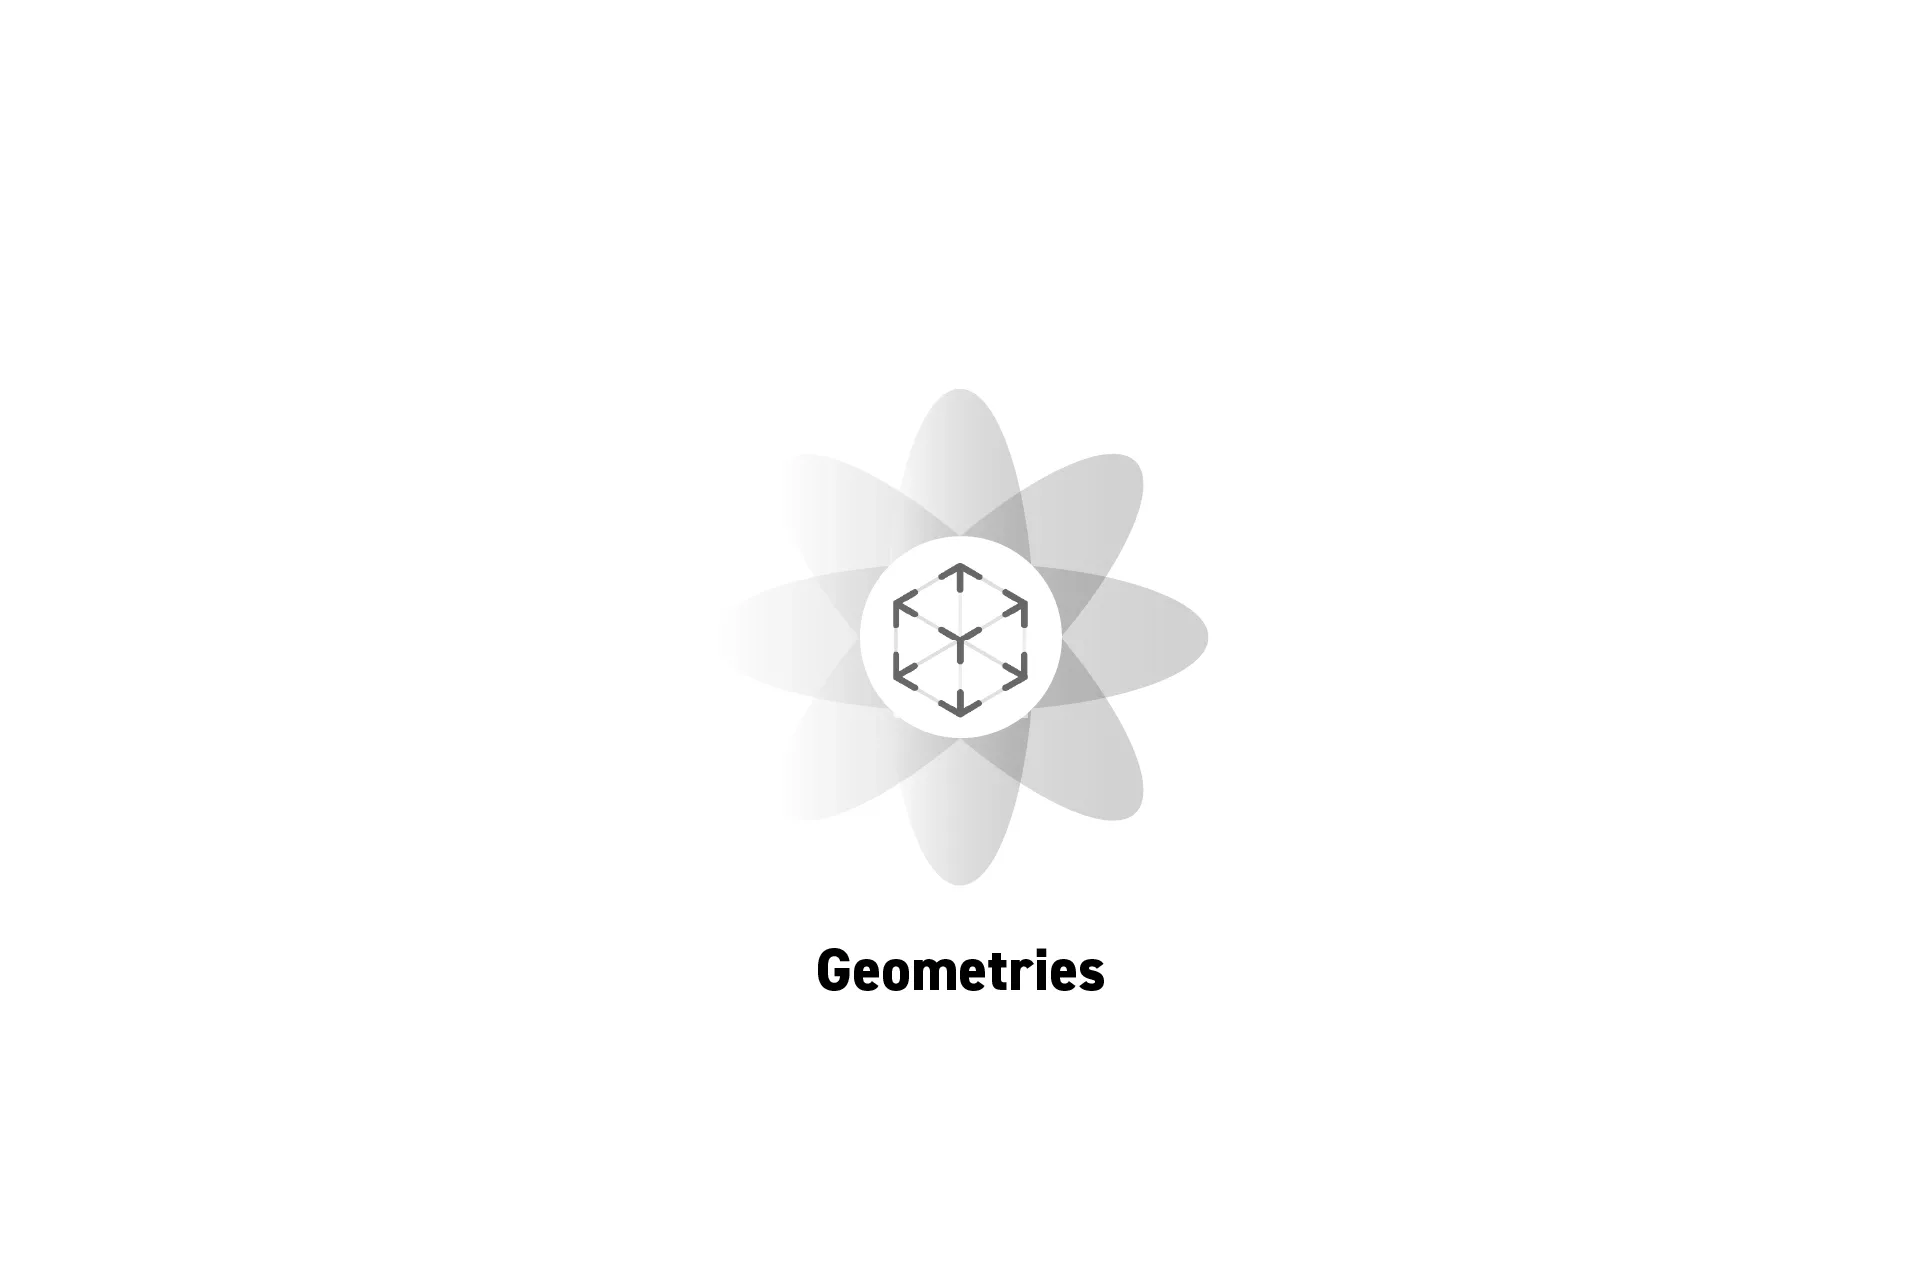 A flower that represents spatial computing with the text "Geometries" beneath it.